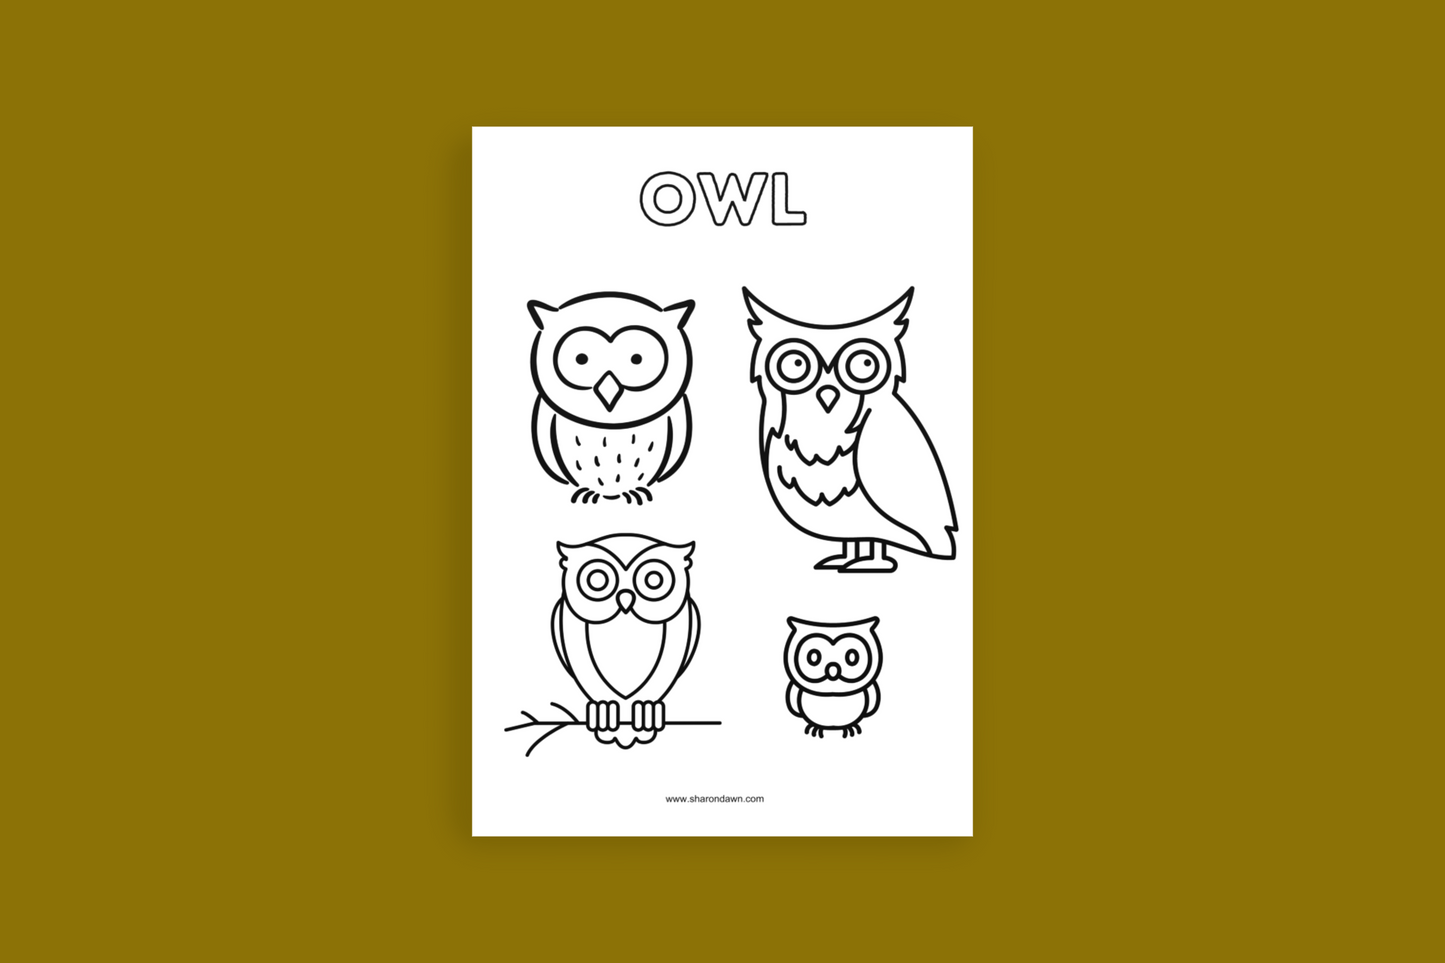 Owl - Colouring Page - Printable Digital Download ~ Sharon Dawn Collection